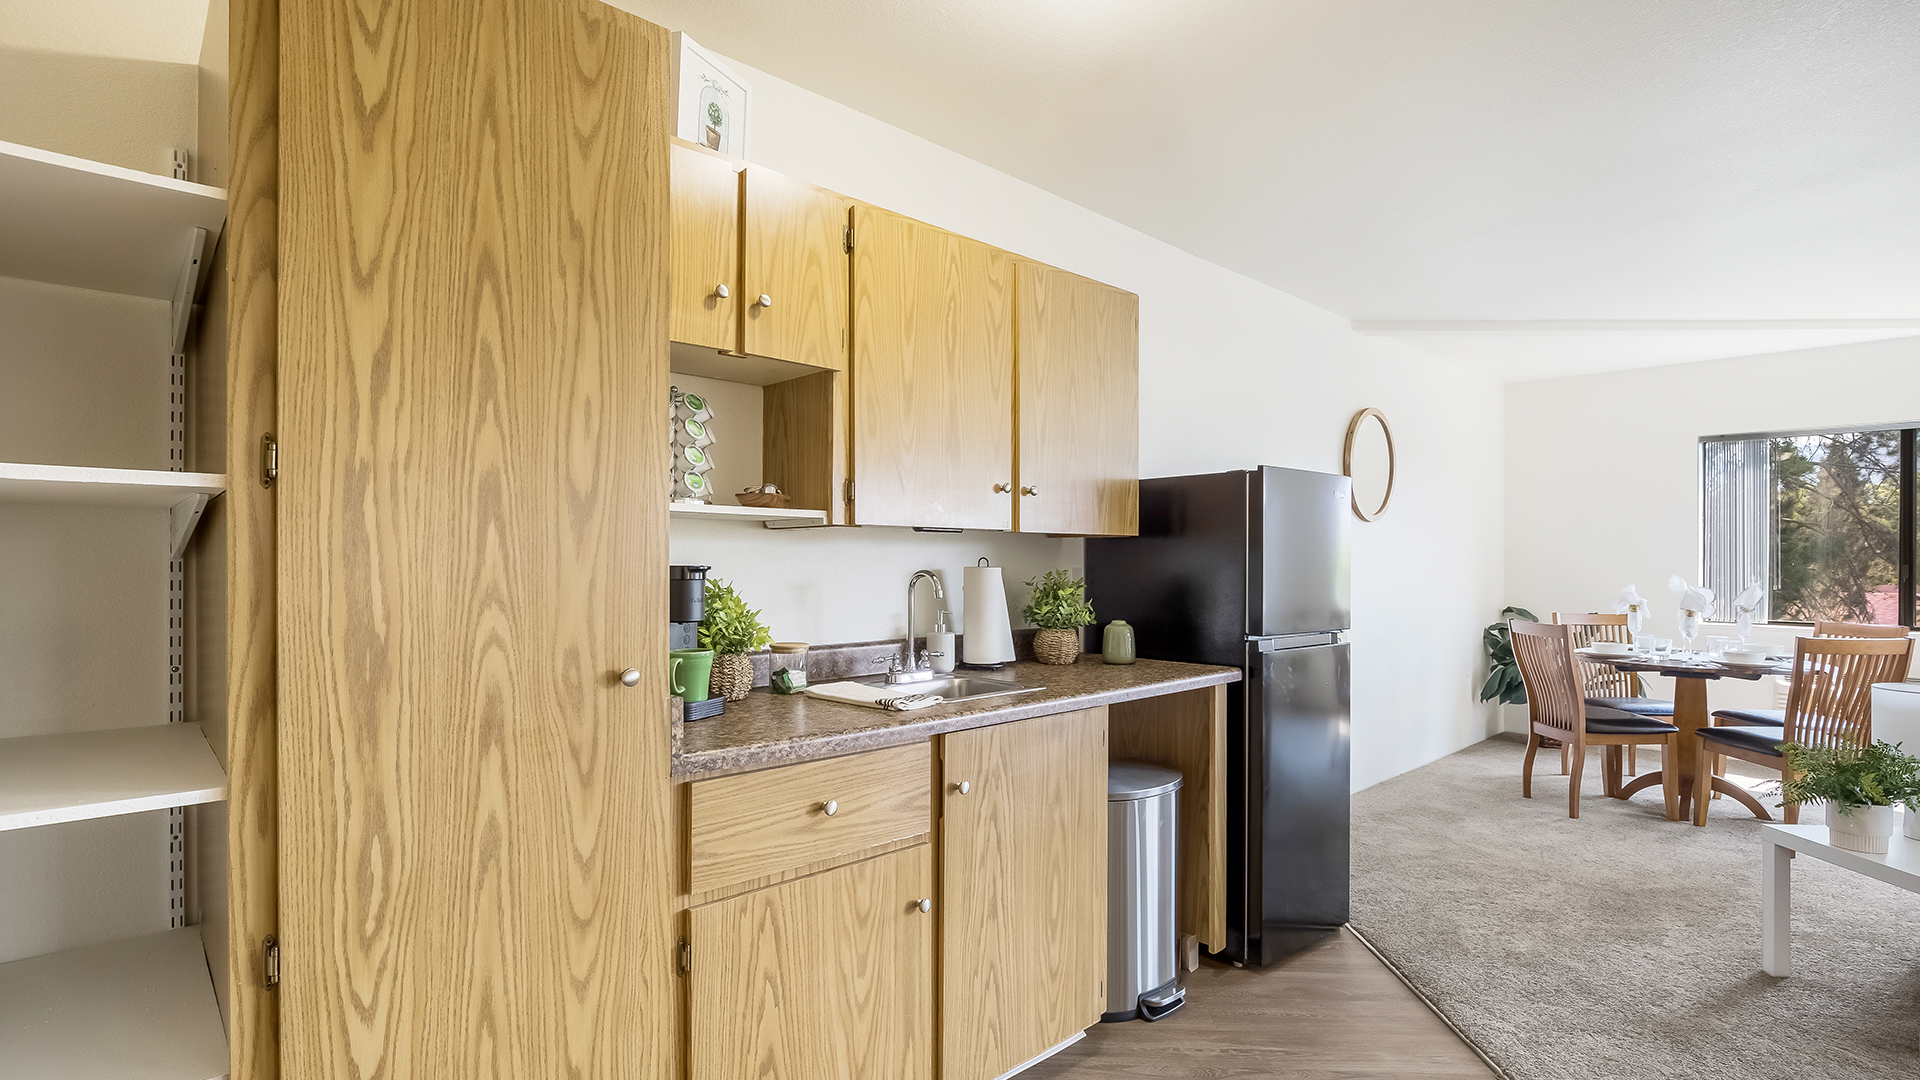 Kitchenette, refrigerator and dining area